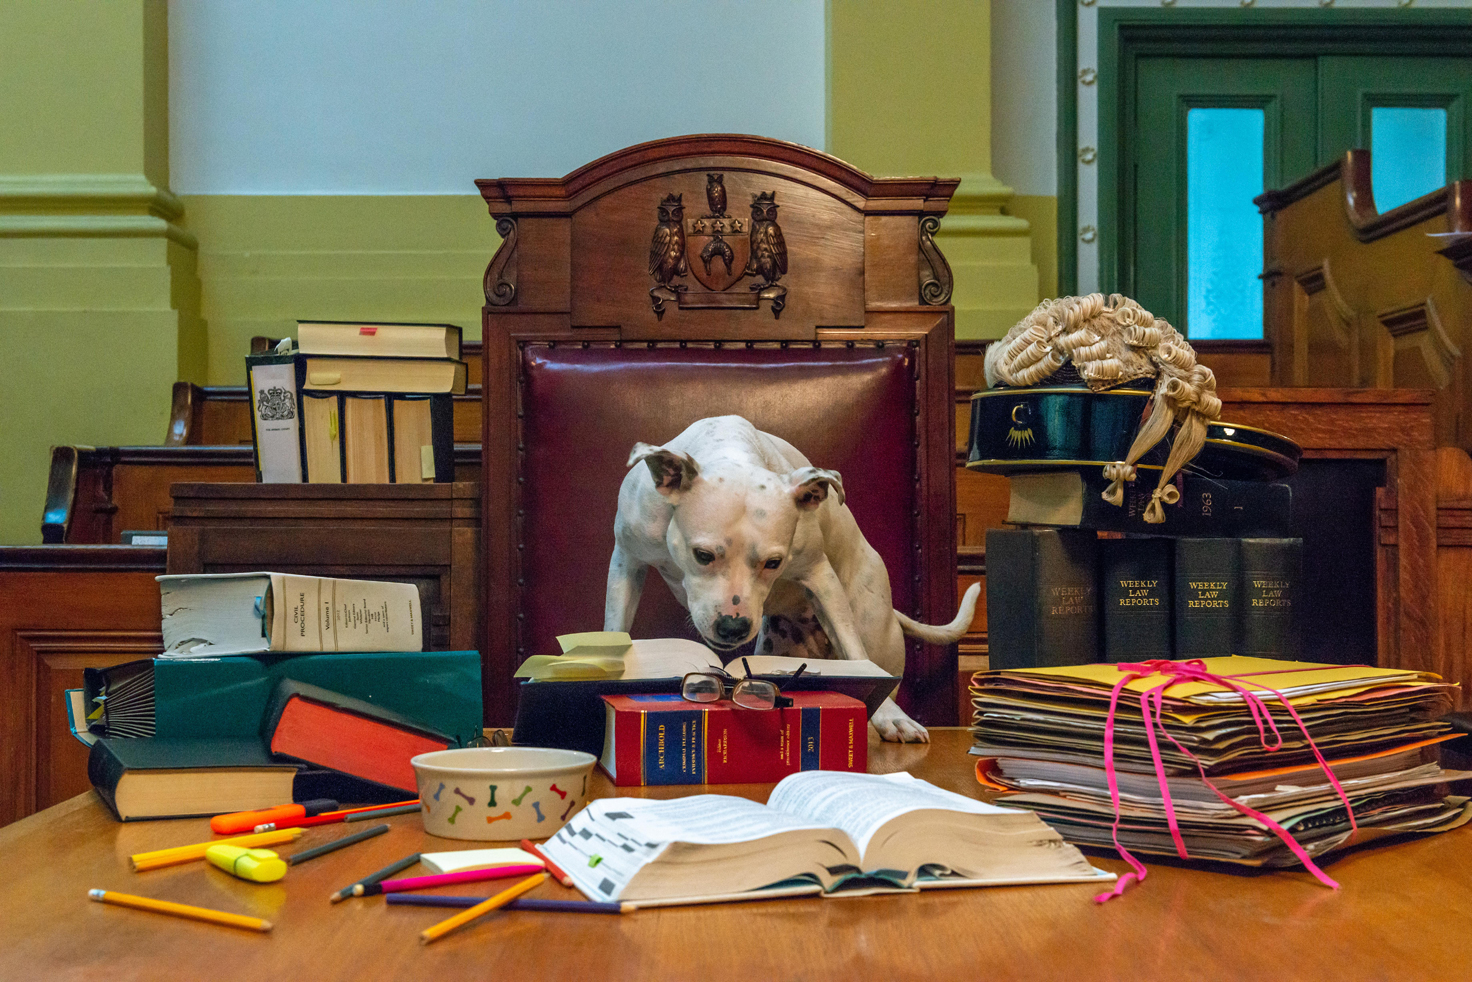 Image of dog in judge's chair